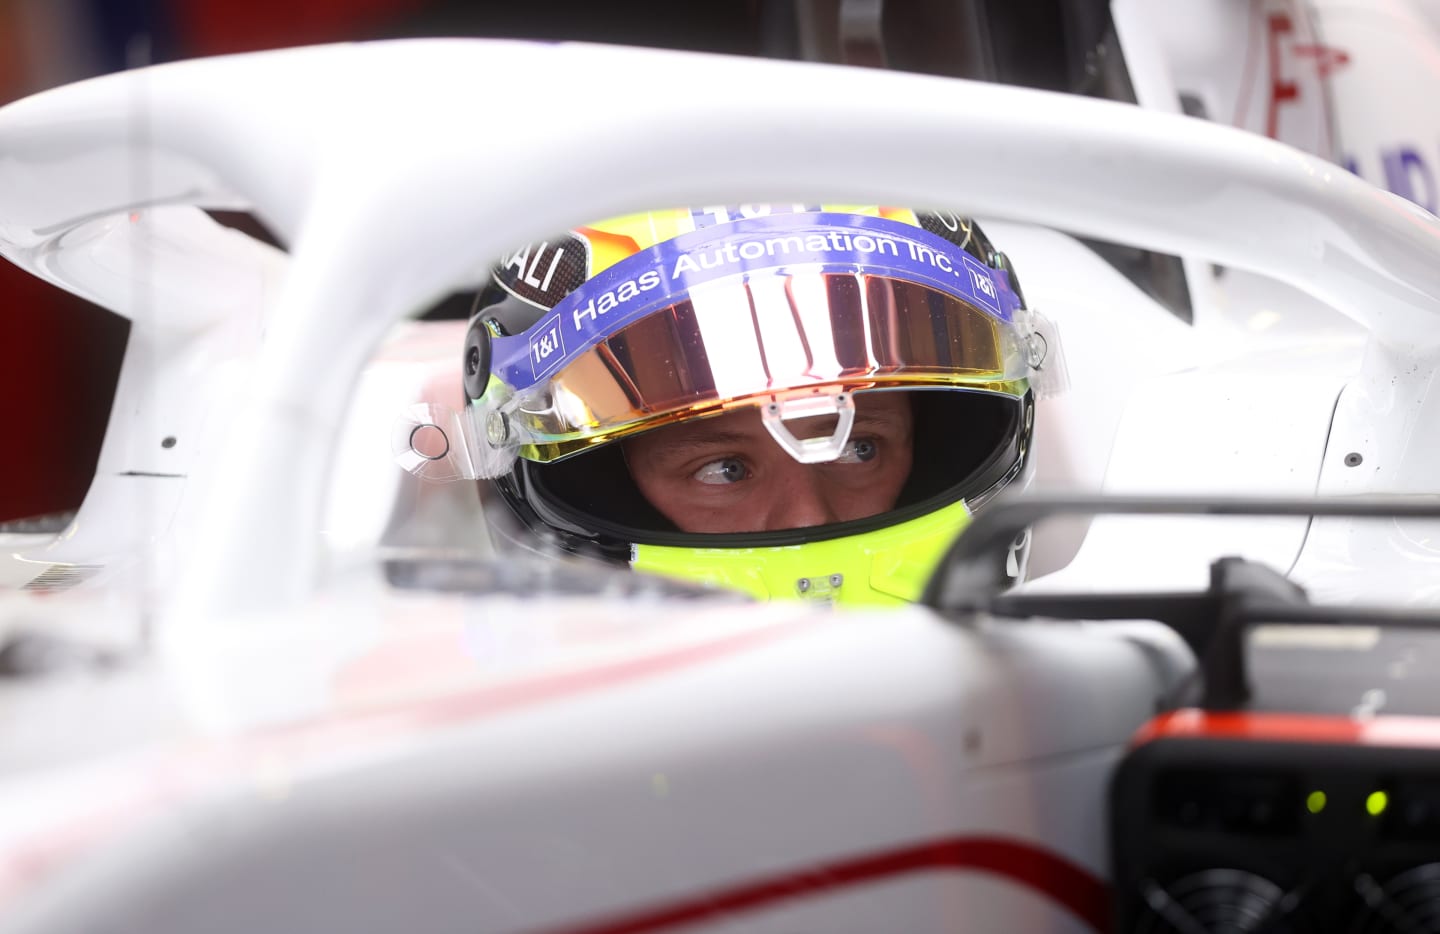 MEXICO CITY, MEXICO: Mick Schumacher of Germany and Haas F1 prepares to drive in the garage ahead of the F1 Grand Prix of Mexico at Autodromo Hermanos Rodriguez (Photo by Lars Baron/Getty Images)